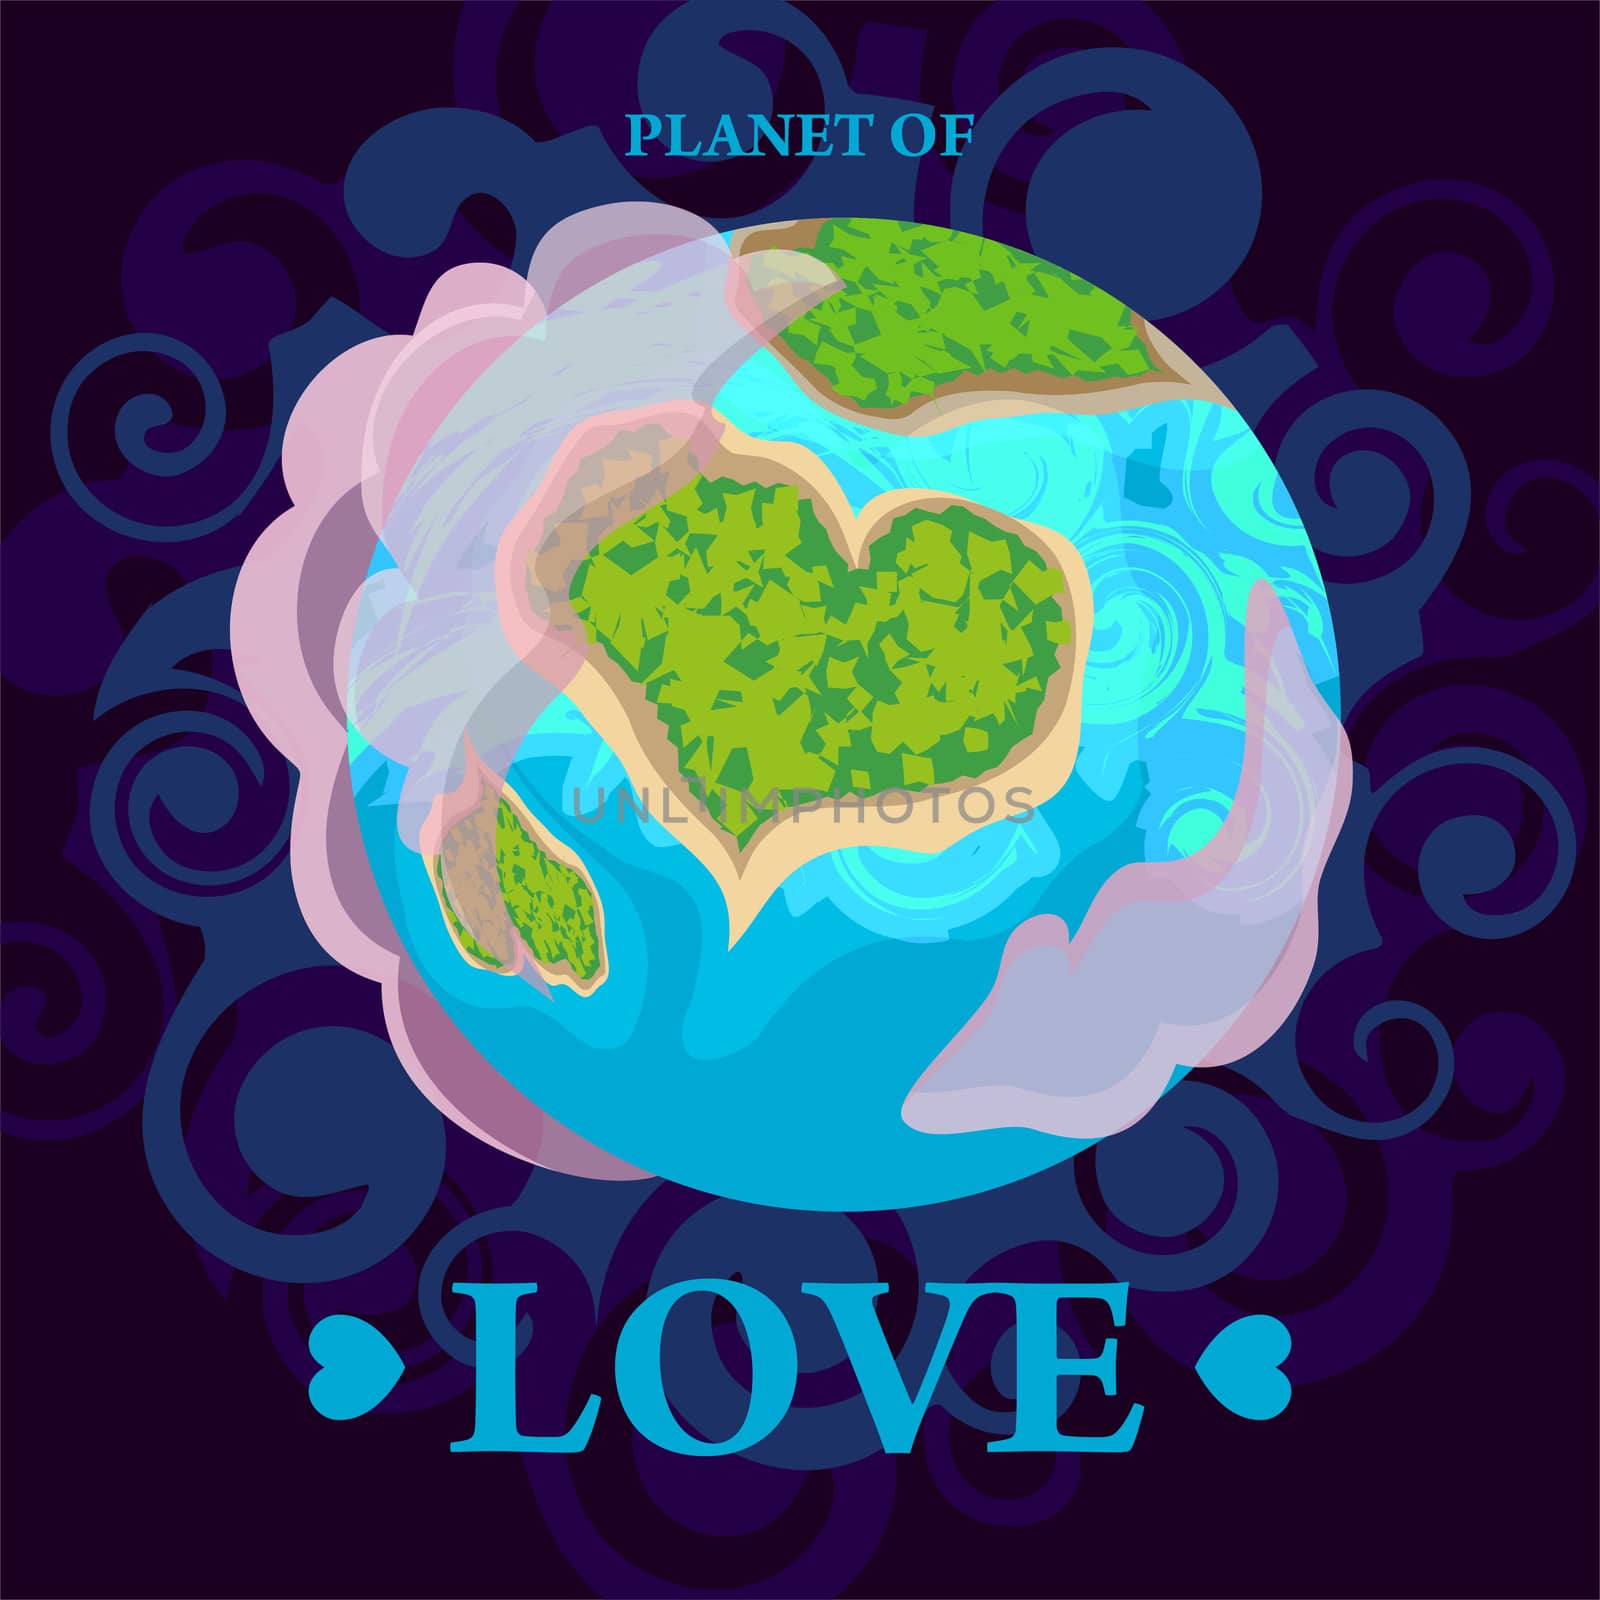 Planet earth is a view from space and earth is in the form of a heart. by Adamchuk